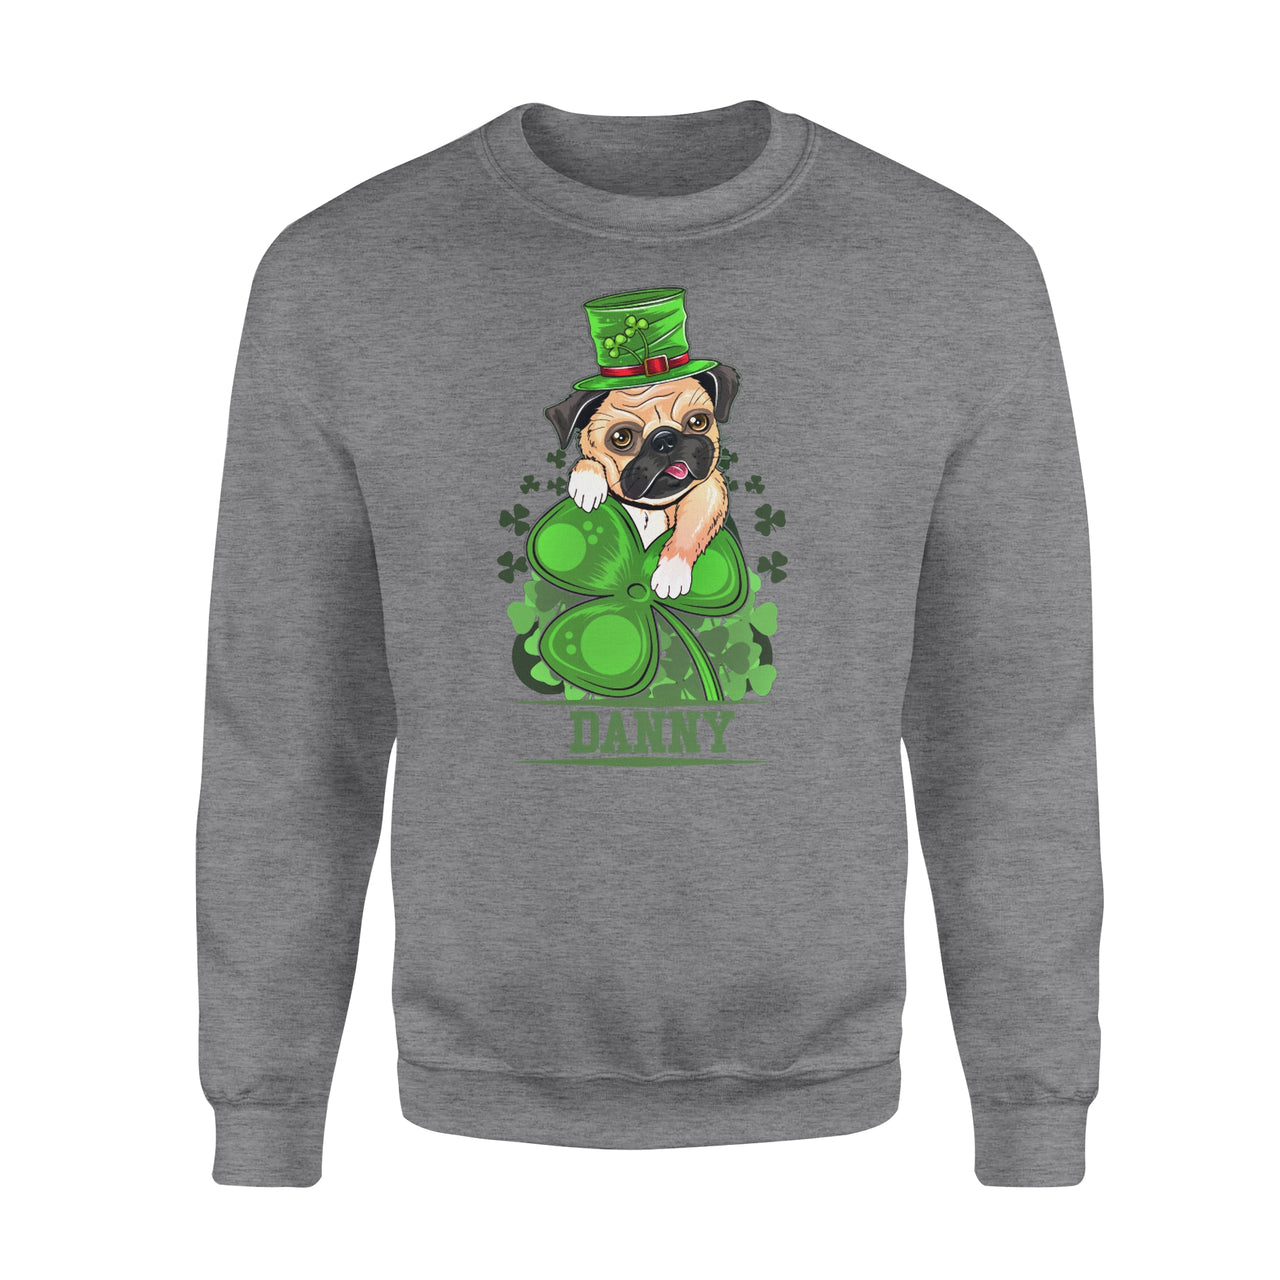 Personalized St. Patrick Gift Idea - Lovely Bulldog With Clover - Standard Crew Neck Sweatshirt